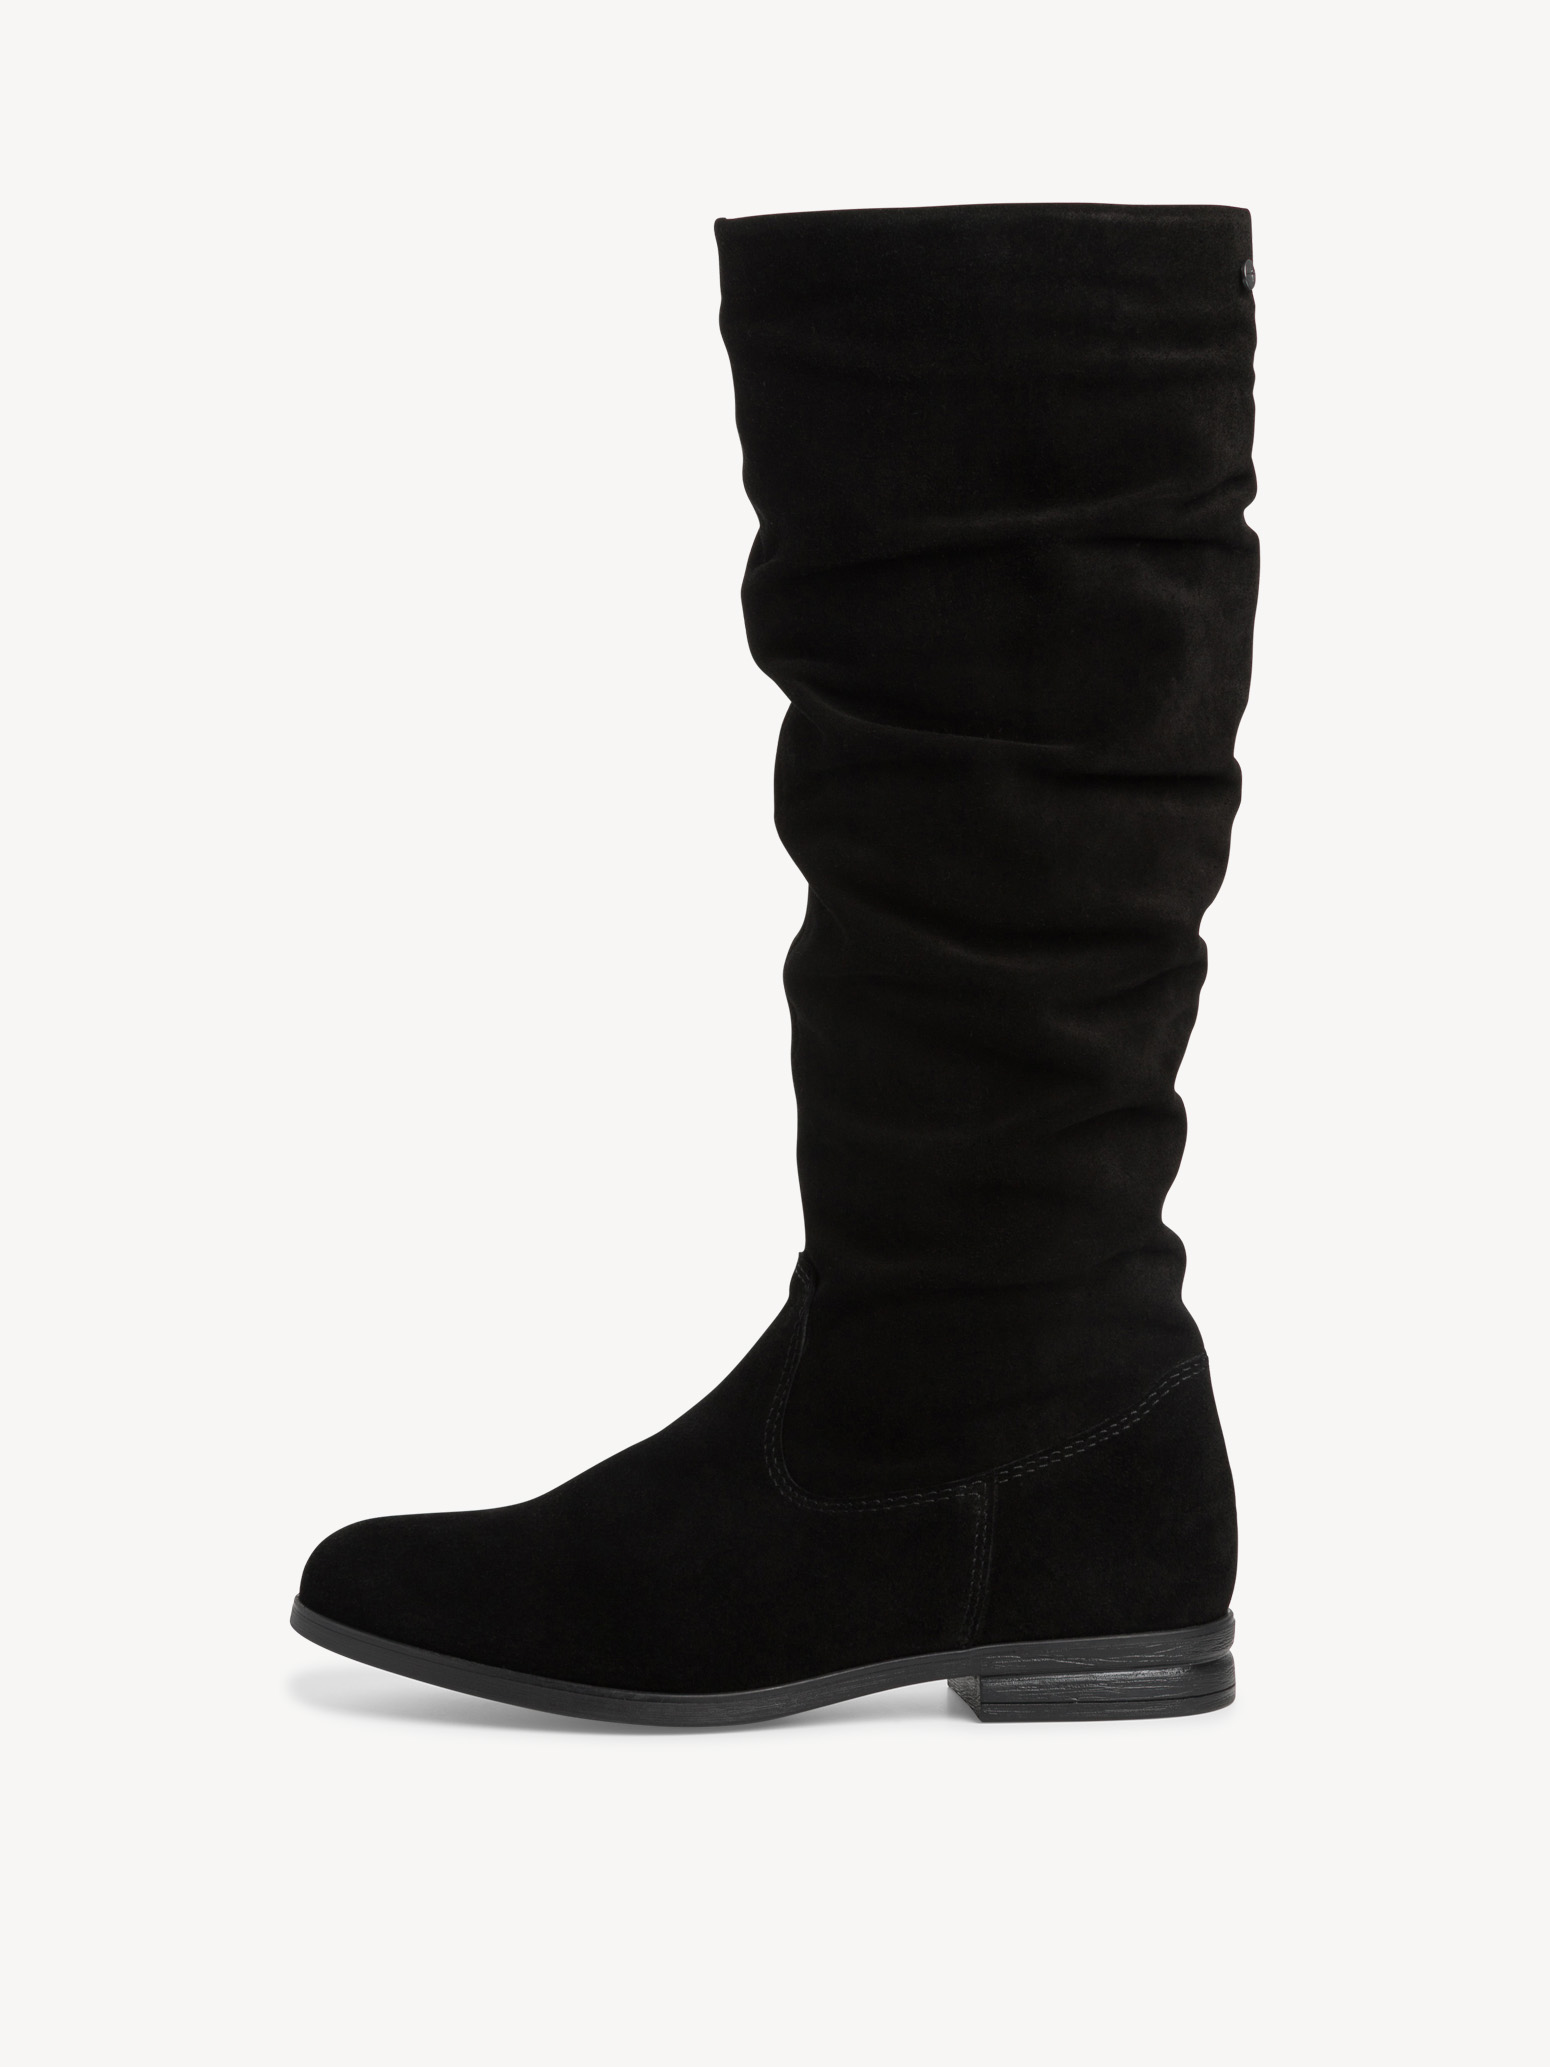 Leather Boots - black